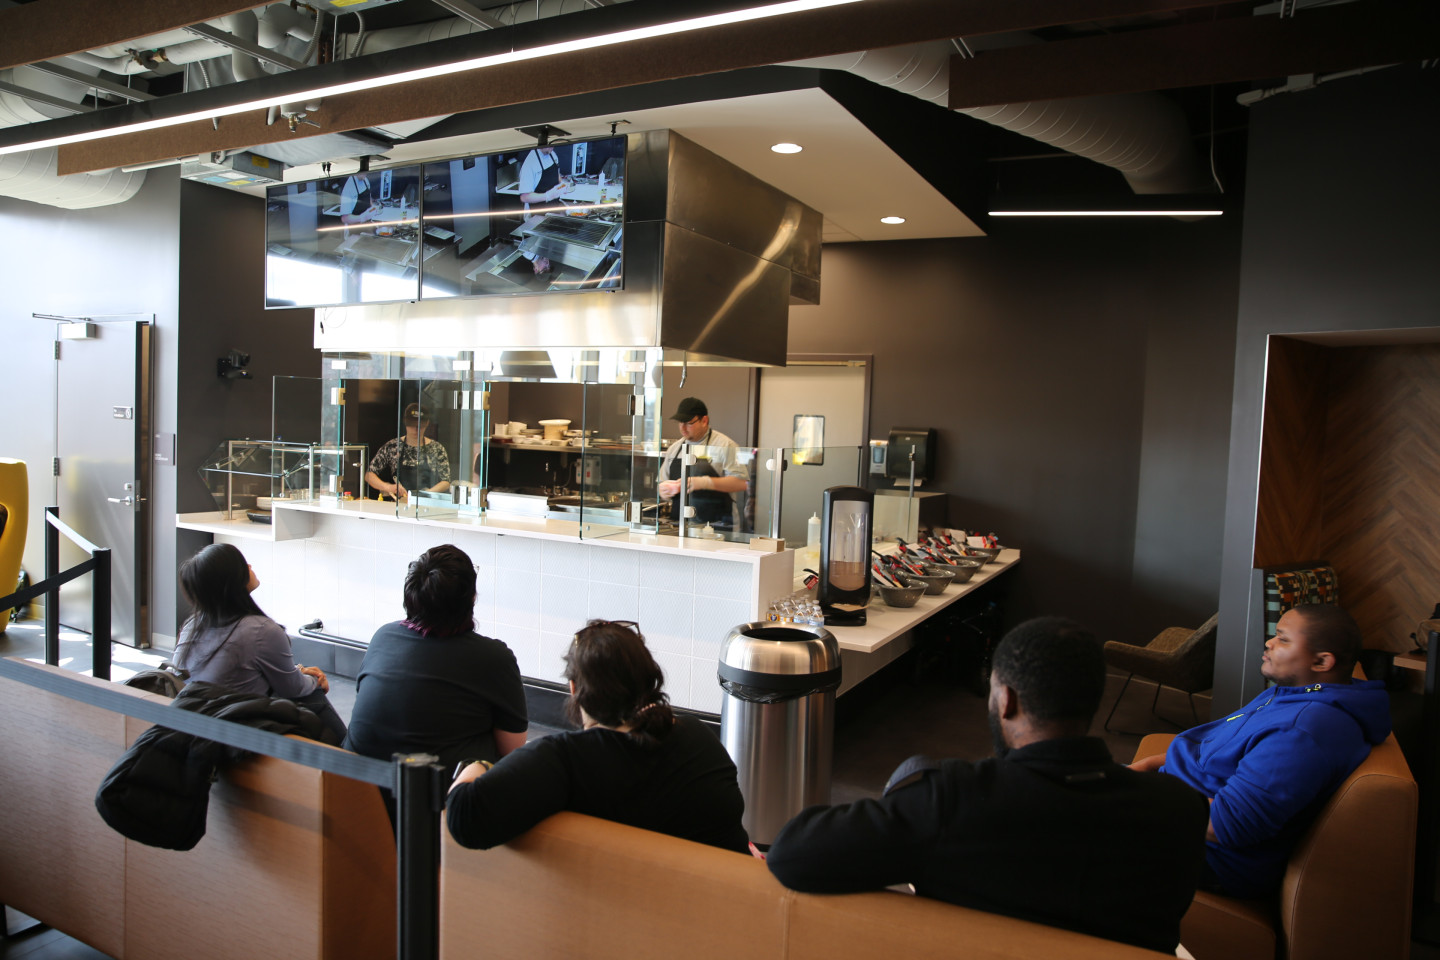 Chef Francisco cooking a quesadilla in the demo kitchen in the ܽƵ Student Center with students watching.